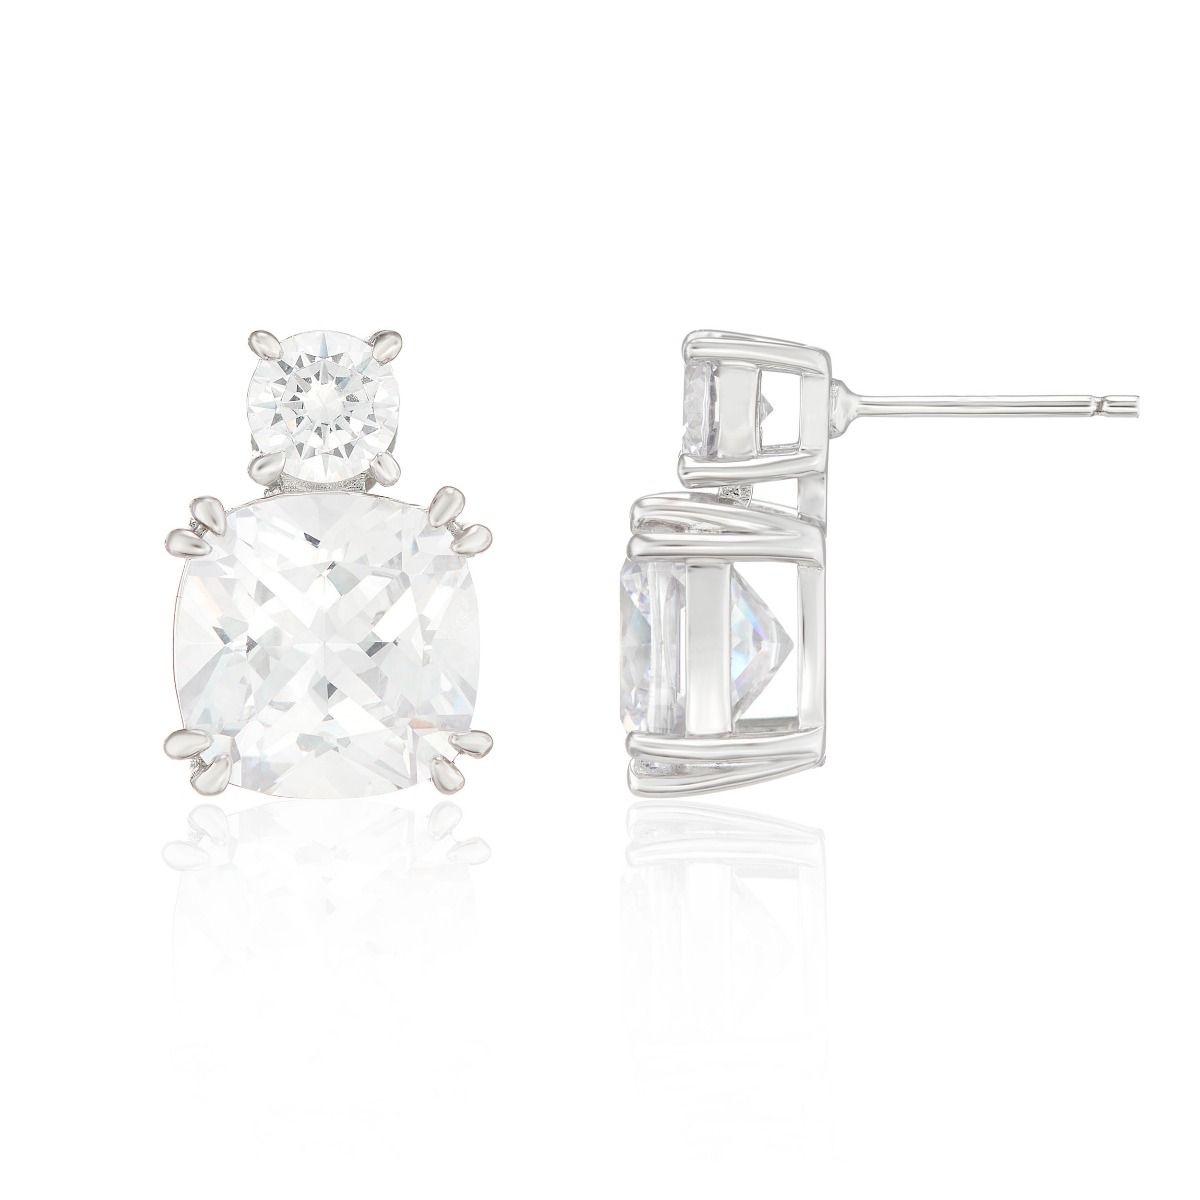 BUCKLEY LONDON The Flawless Collection - Clear Cushion Meghan Drop Earrings